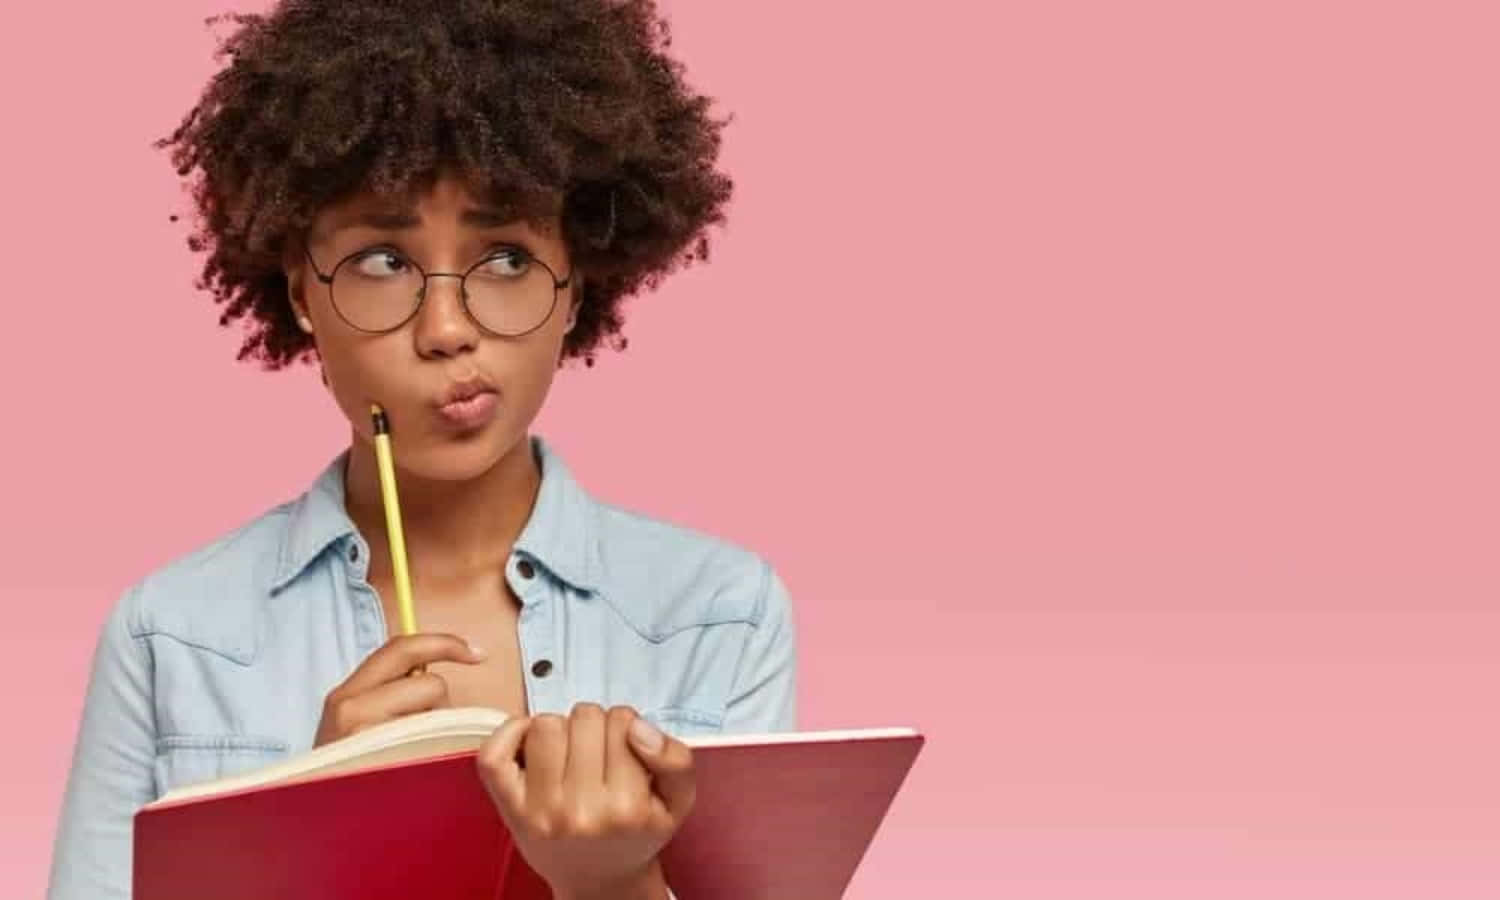 A Girl With Glasses Is Holding A Notebook And Pencil